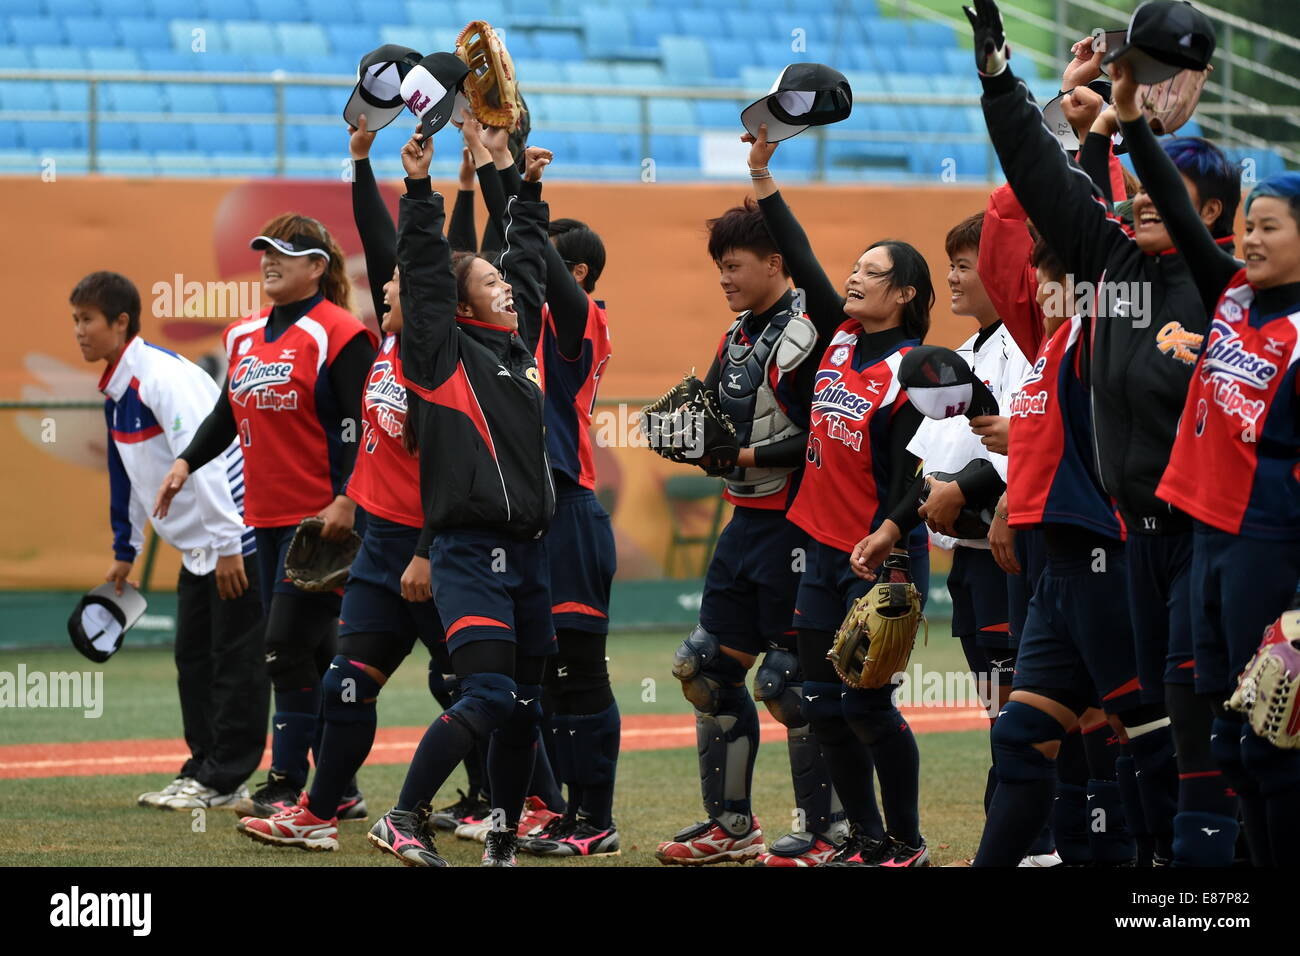 Incheon, South Korea. 2nd Oct, 2014. Players of Chinese Taipei celebrate after the women's softball final against China at the 17th Asian Games in Incheon, South Korea, Oct. 2, 2014. China lost 3-4 and got the bronze medal. © Gao Jianjun/Xinhua/Alamy Live News Stock Photo